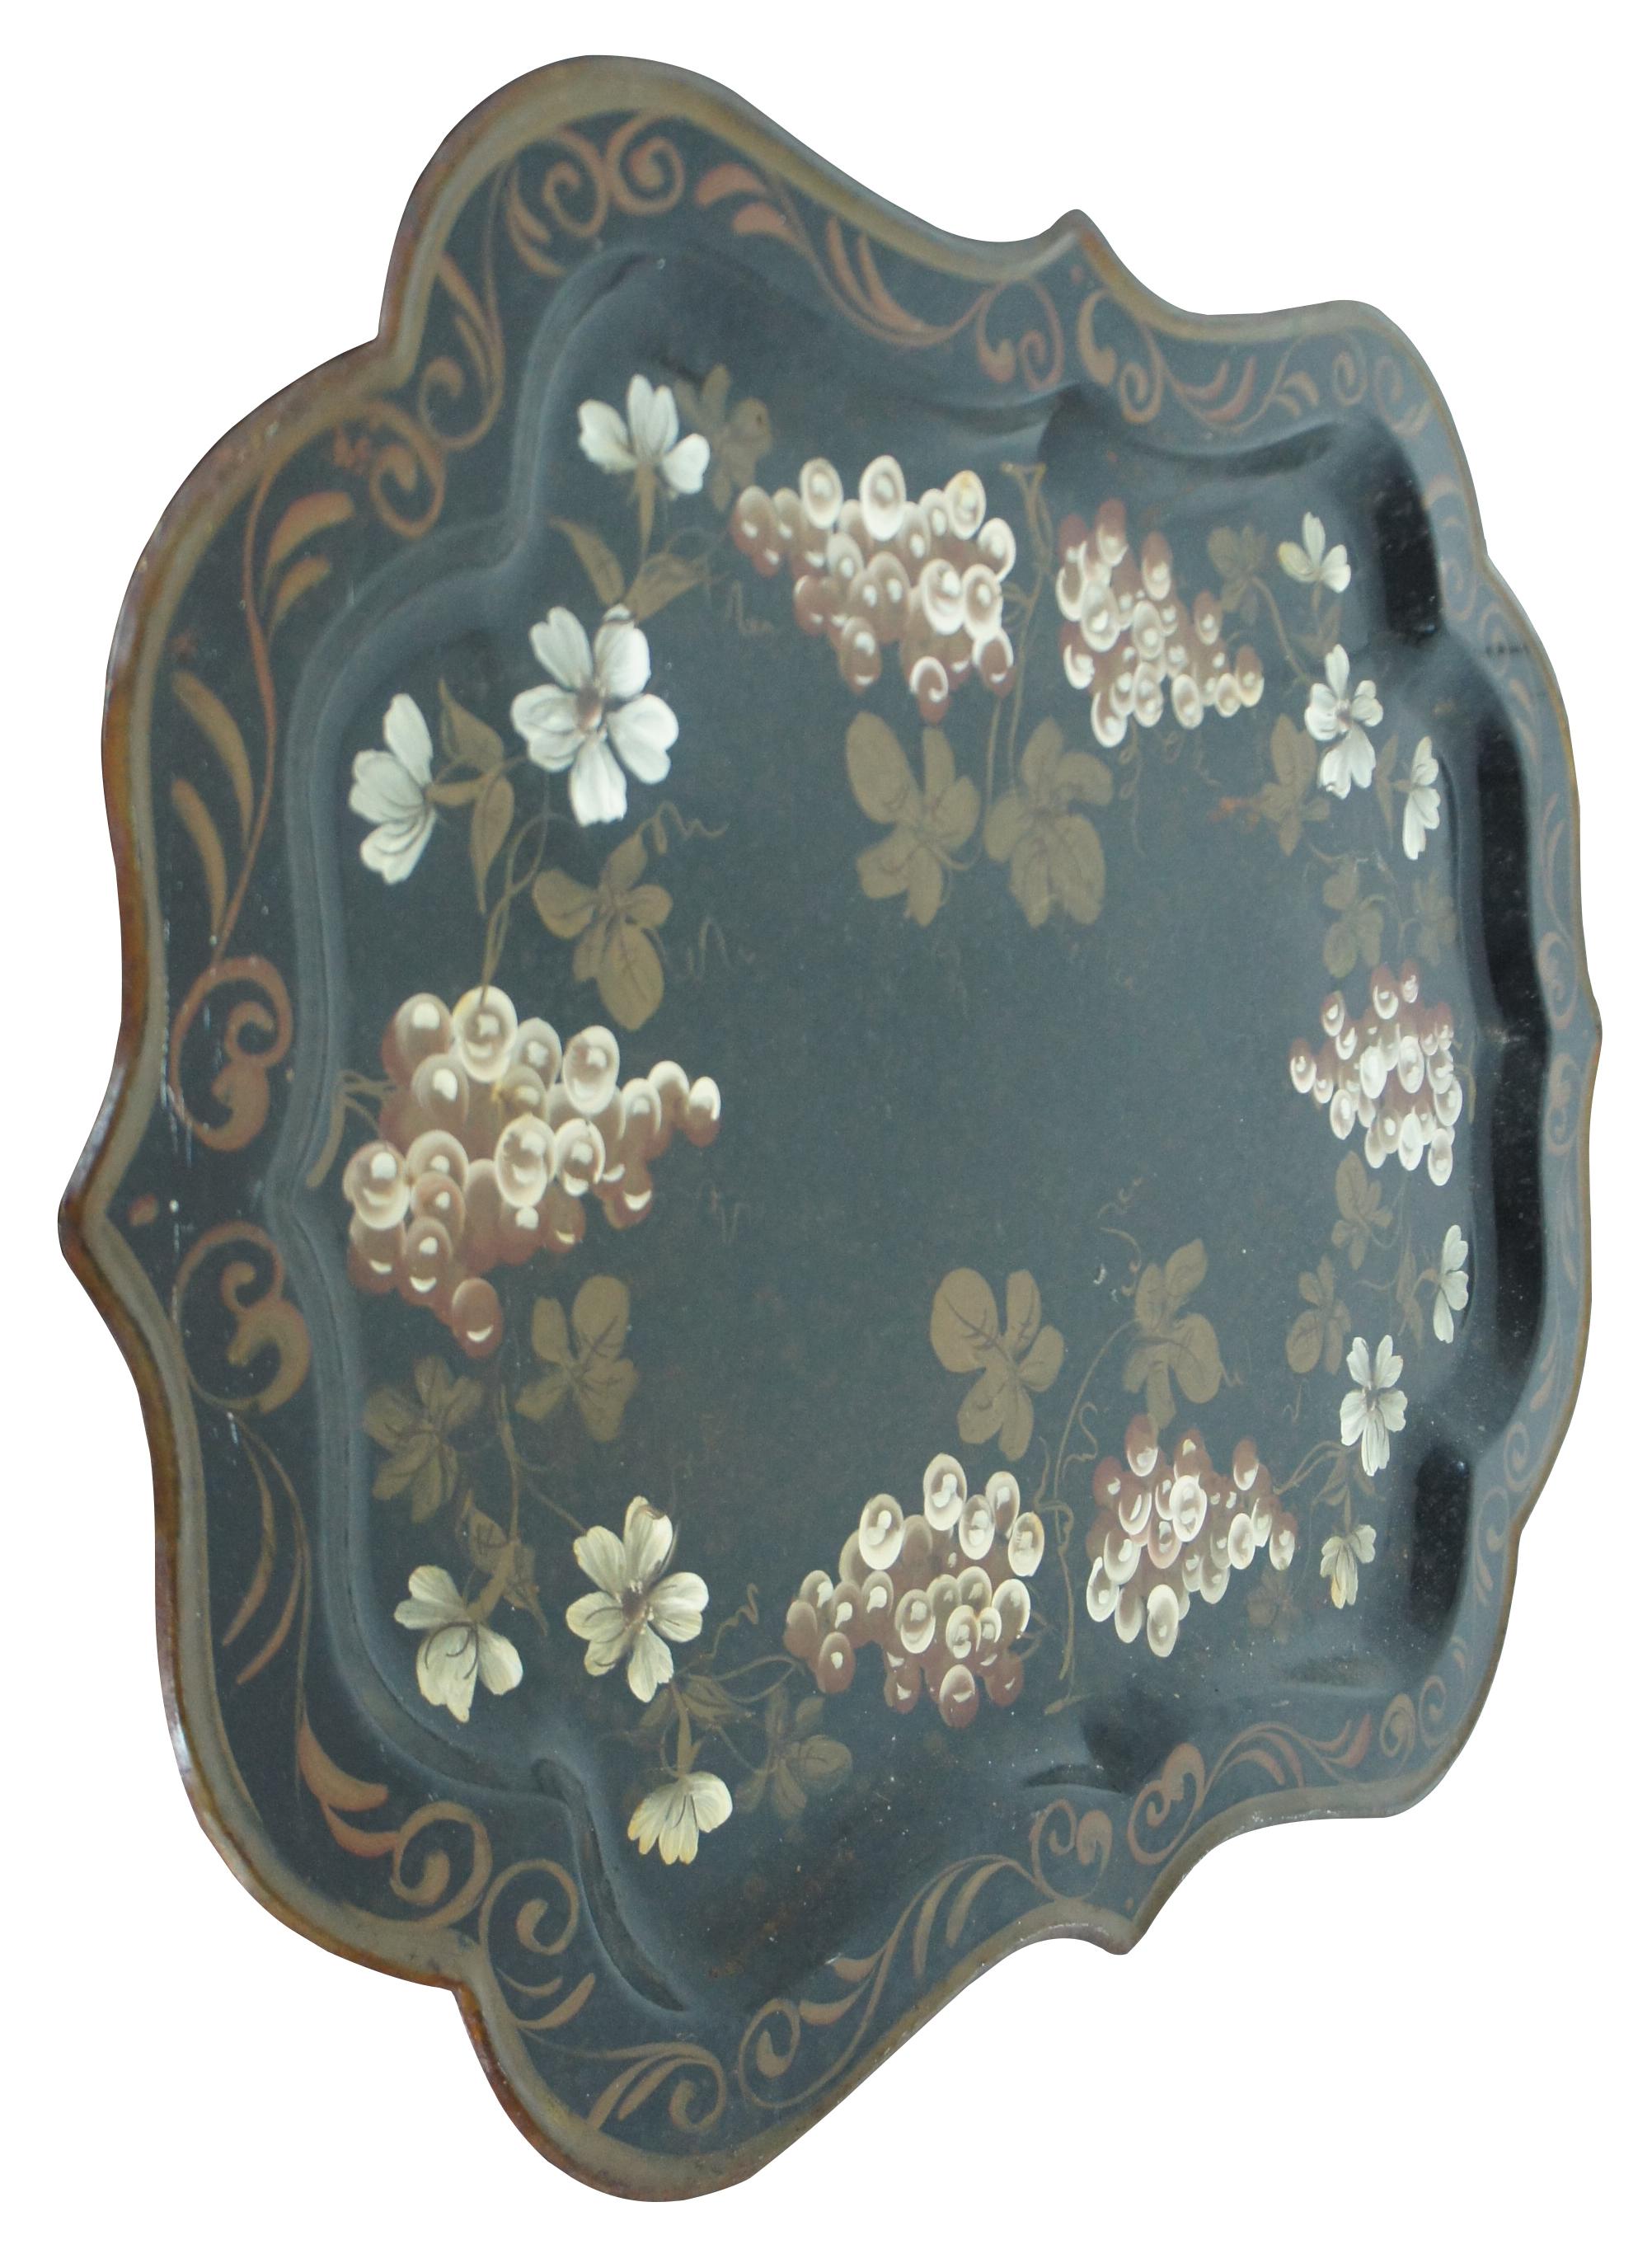 Large antique toleware, painted metal serving tray with scalloped edges bordered in gold, with a design of golden grapes and flowering vines.
